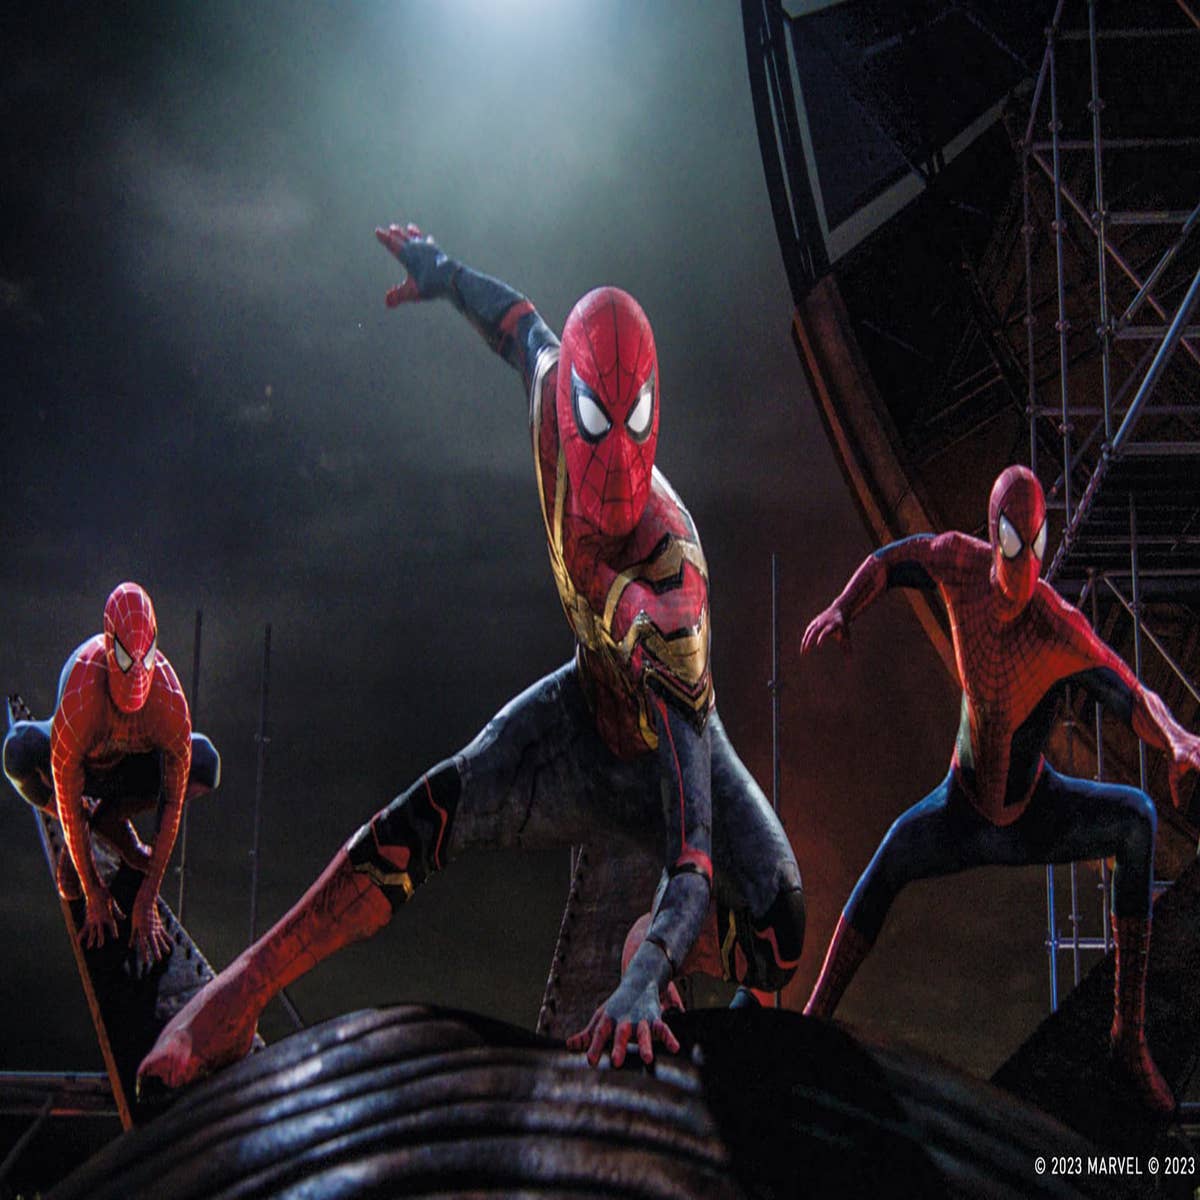 Spider-Man: Ranking all the amazing actors who have played Marvel's  wallcrawler